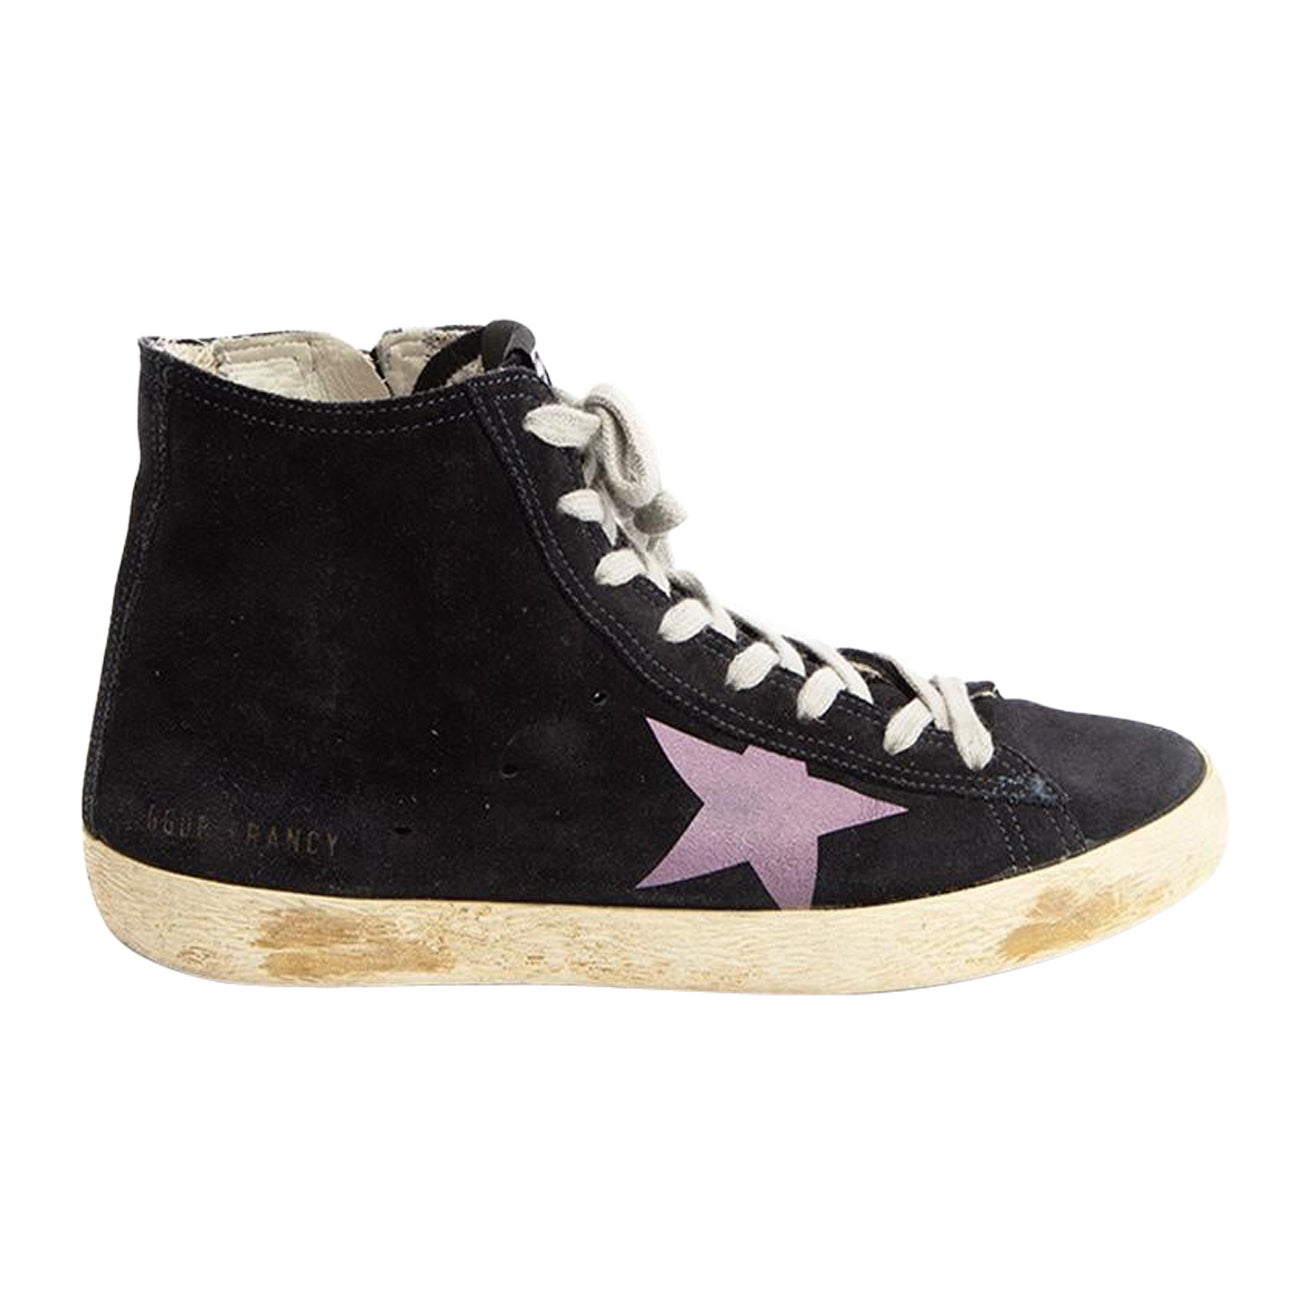 Black Suede Francy High Top Trainers Size IT 37